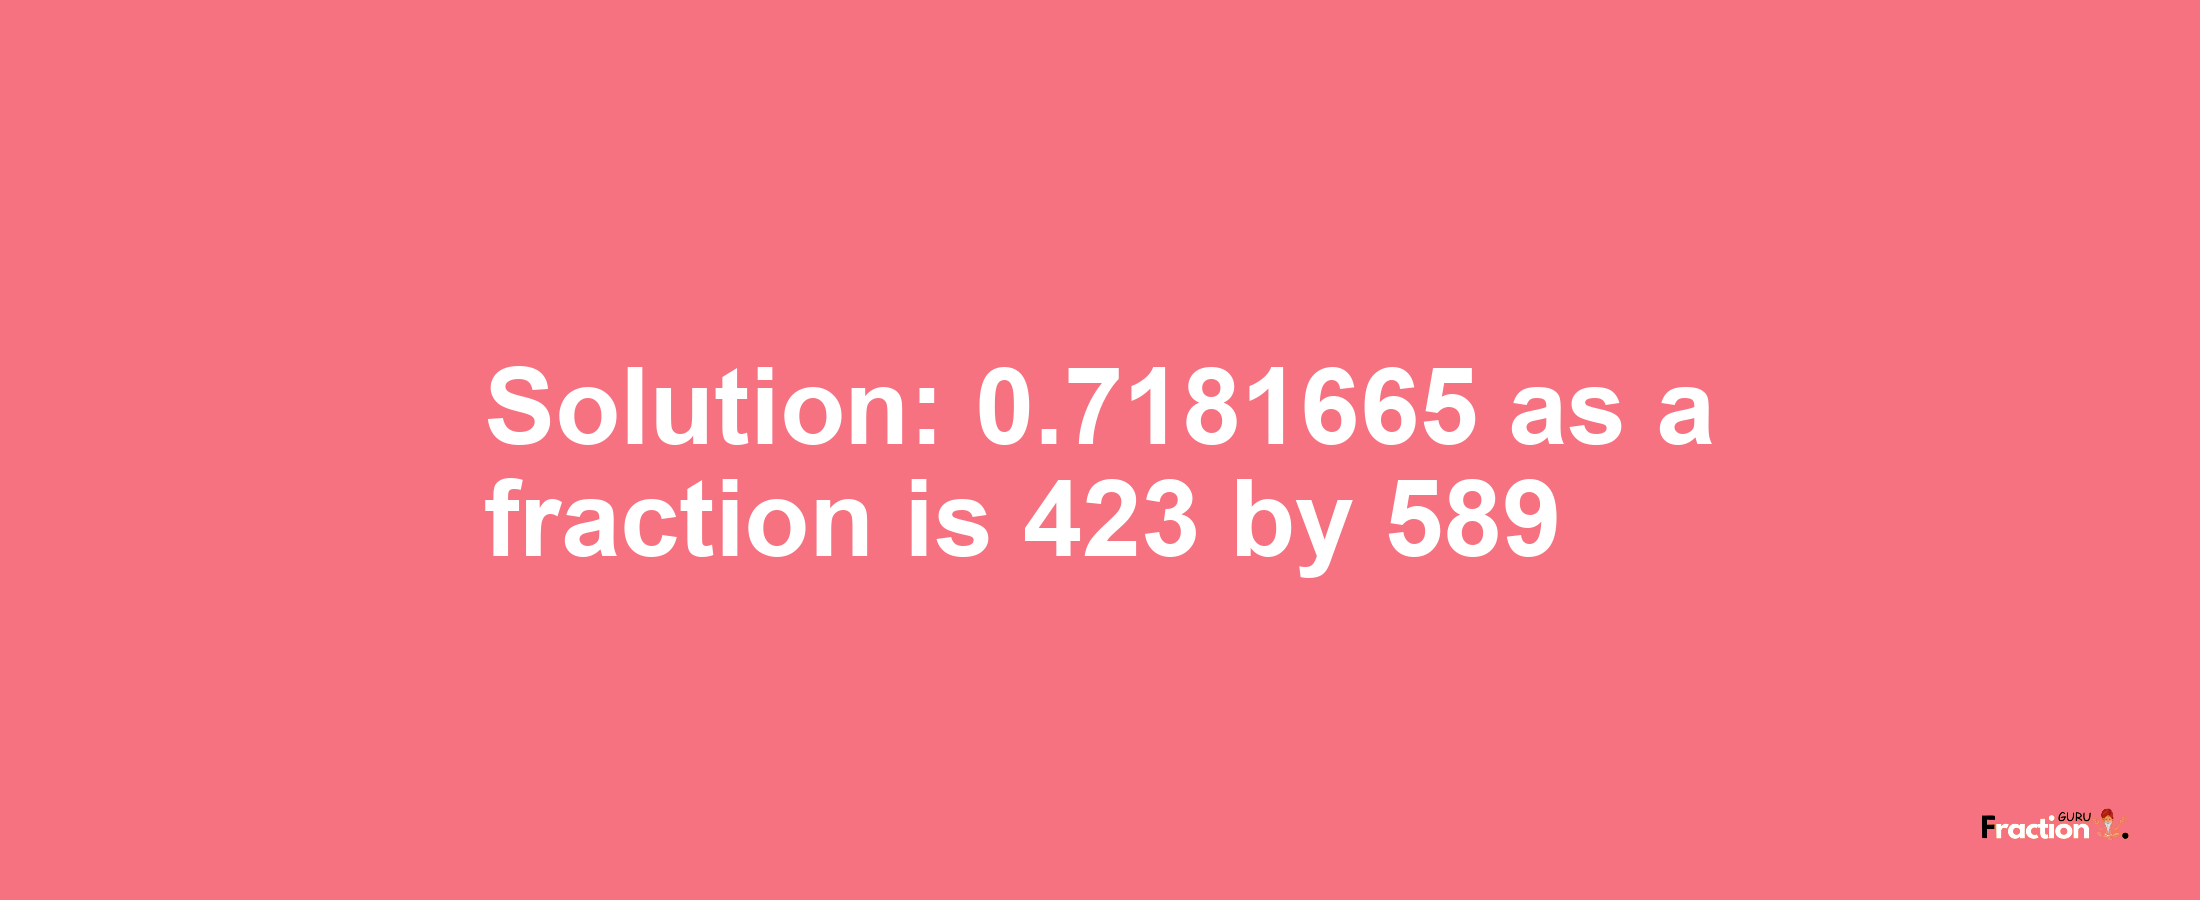 Solution:0.7181665 as a fraction is 423/589